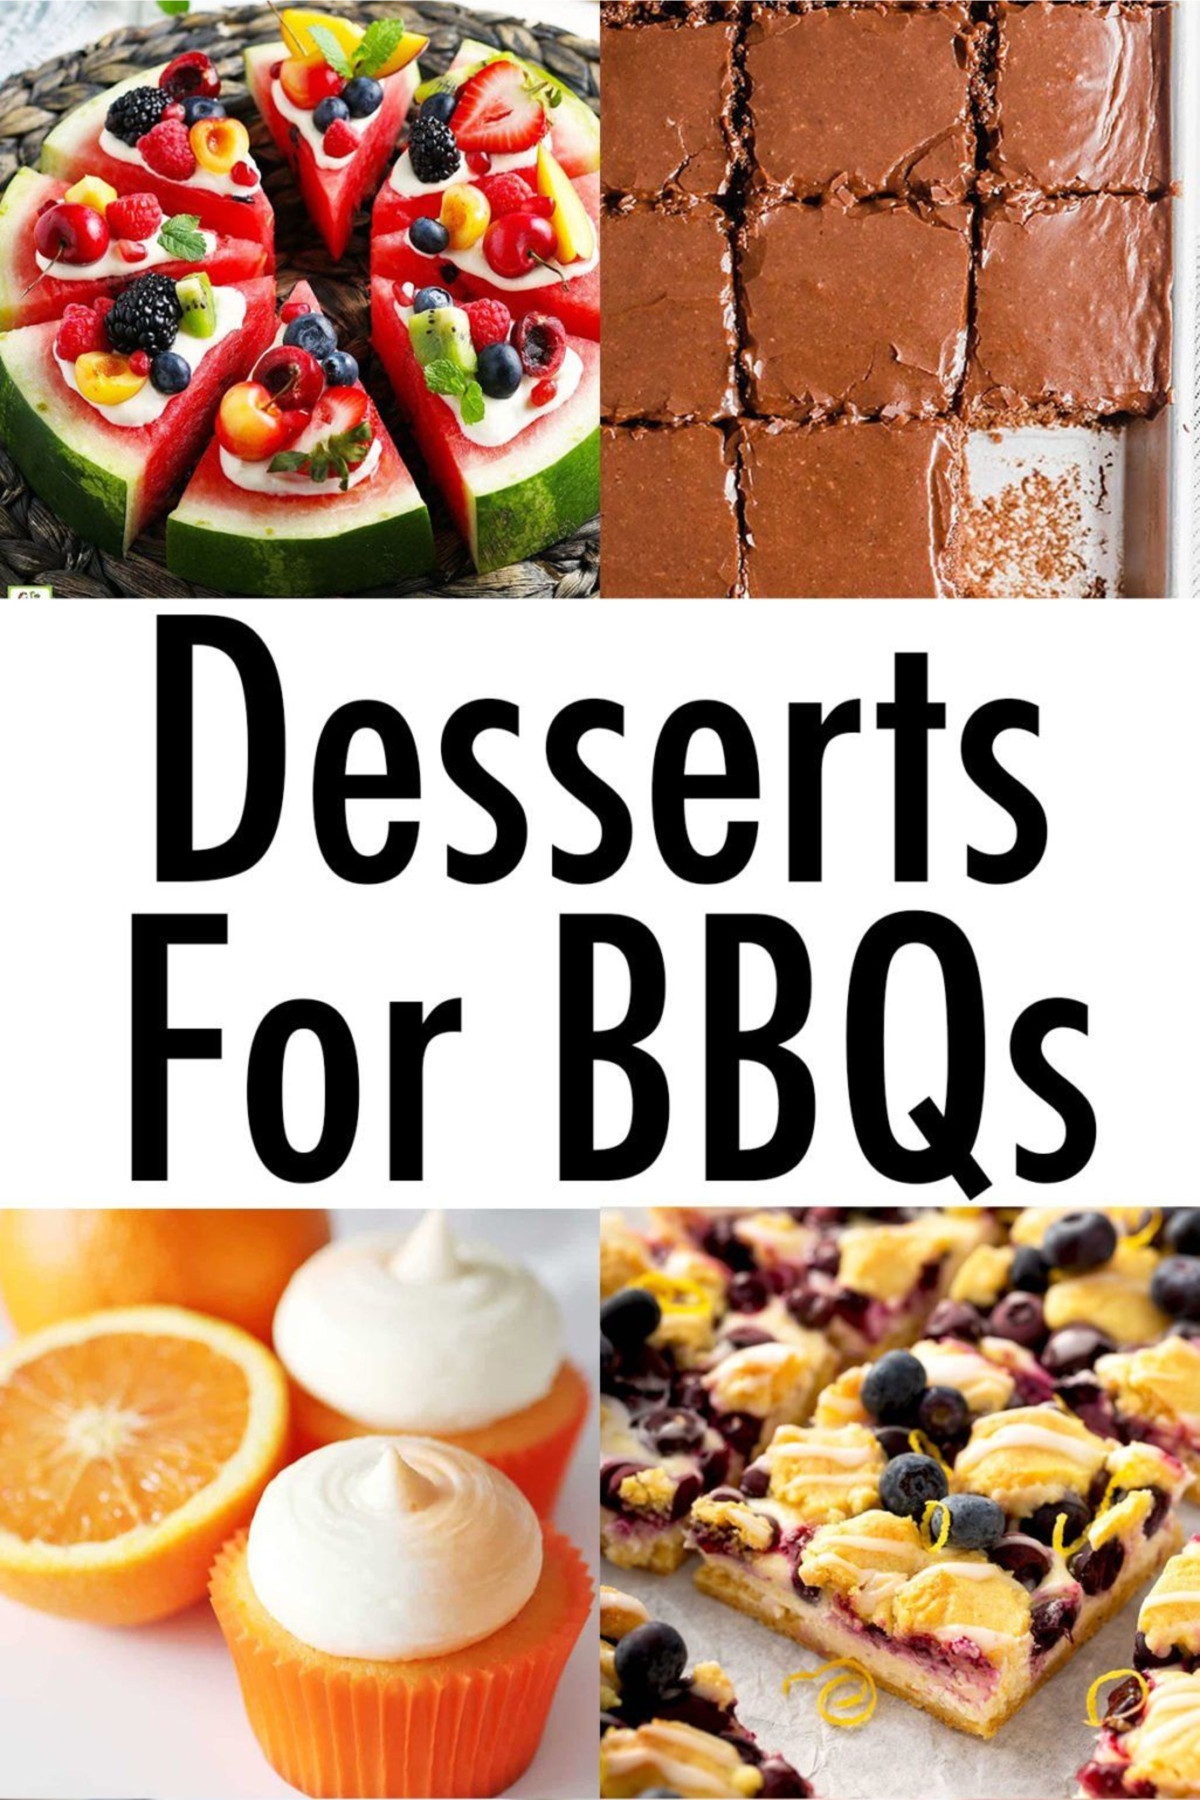 Easy Desserts For BBQ Parties